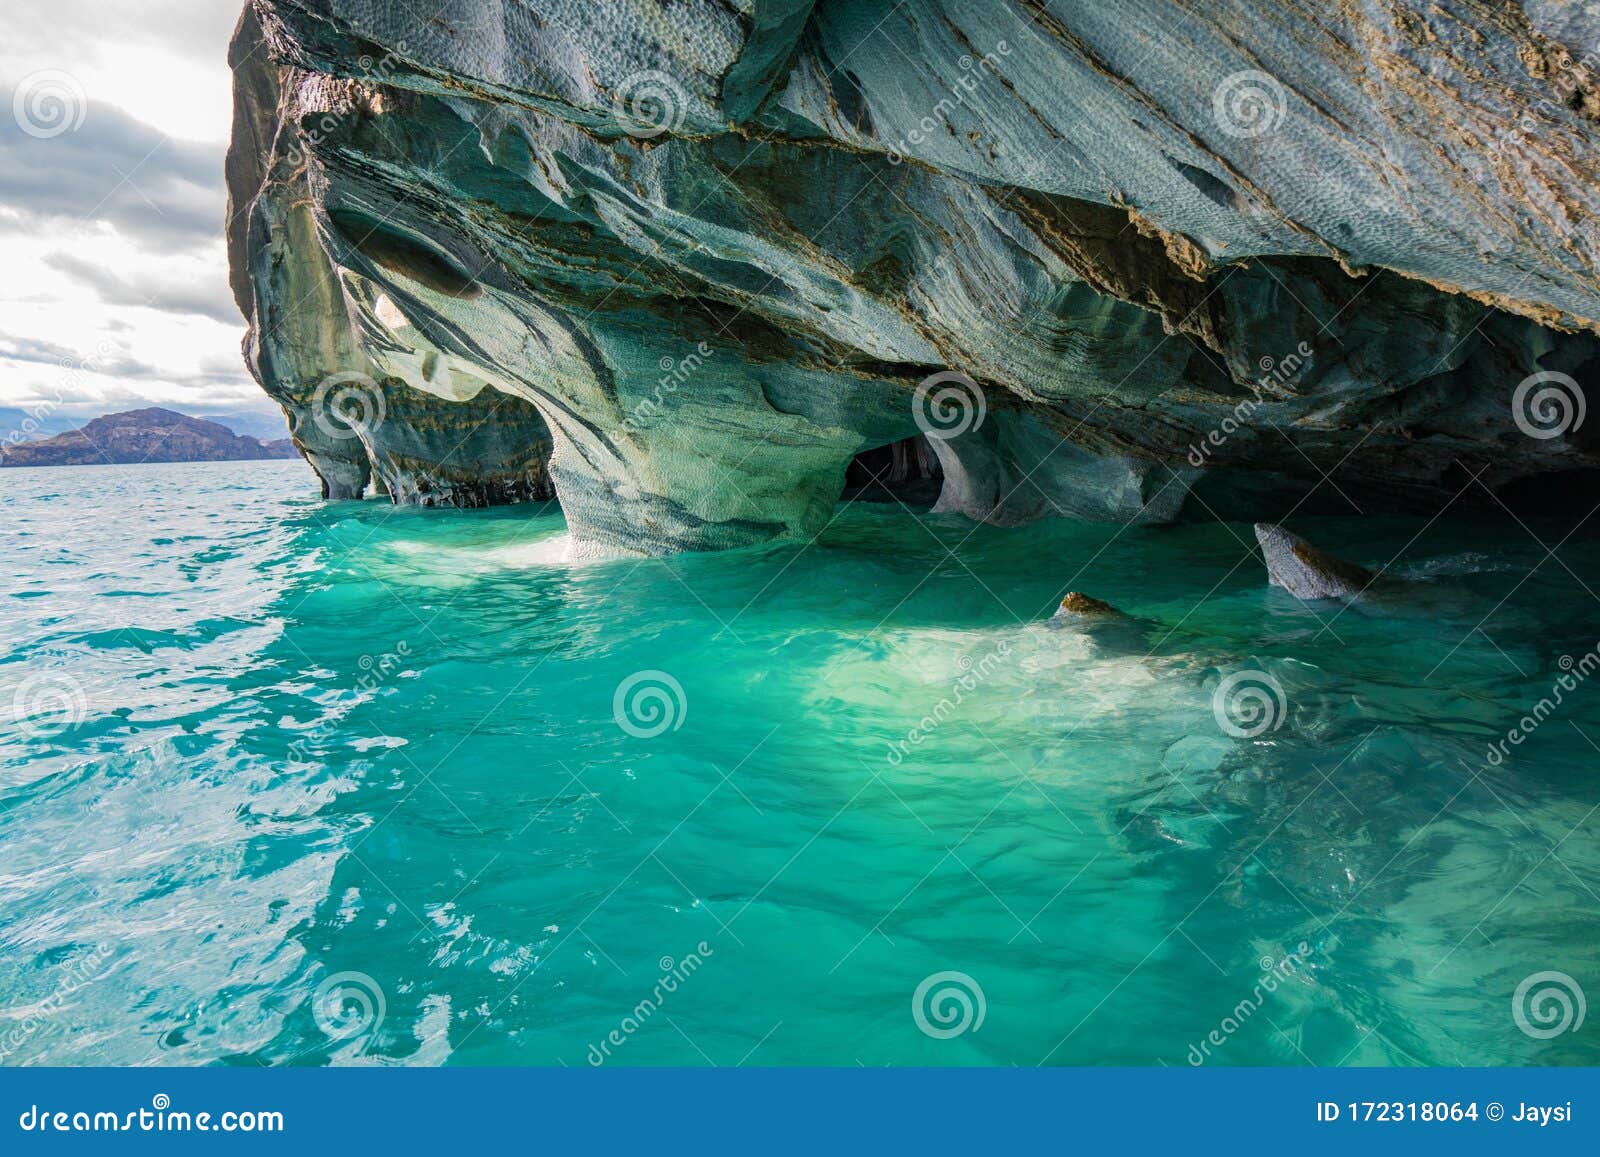 marble caves capillas del marmol, general carrera lake, landscape of lago buenos aires, patagonia, chile